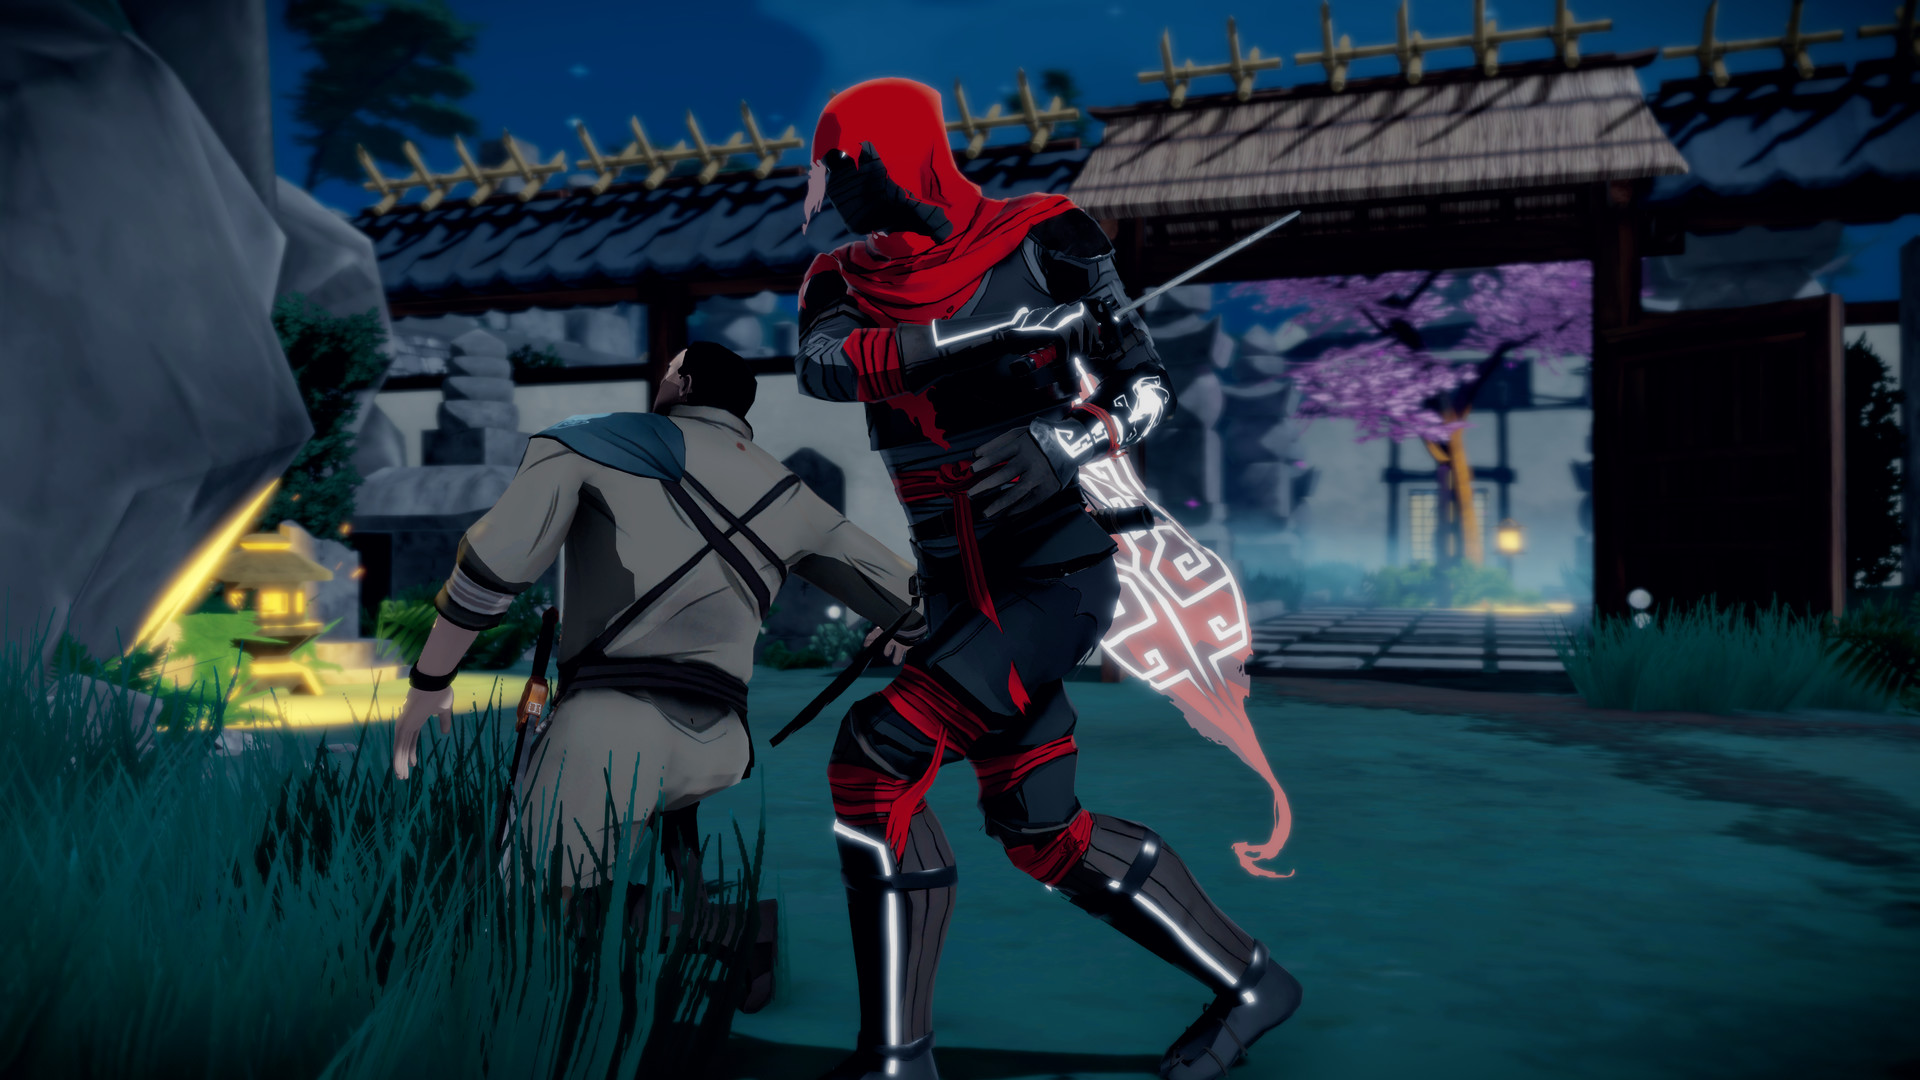 Find the best laptops for Aragami